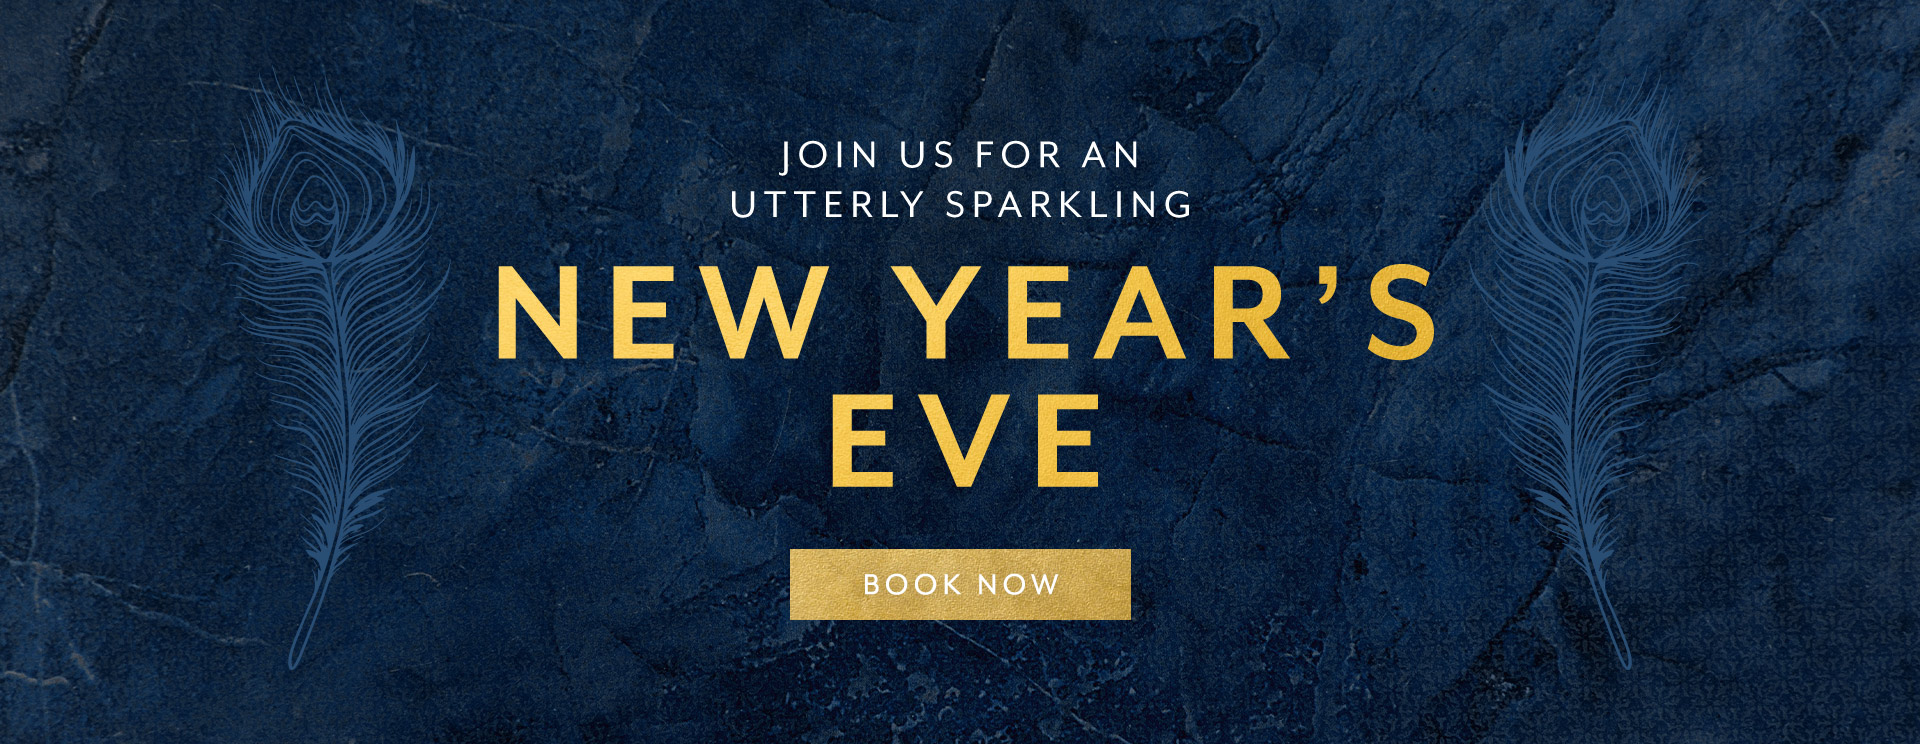 New Year's Eve at The George & Dragon